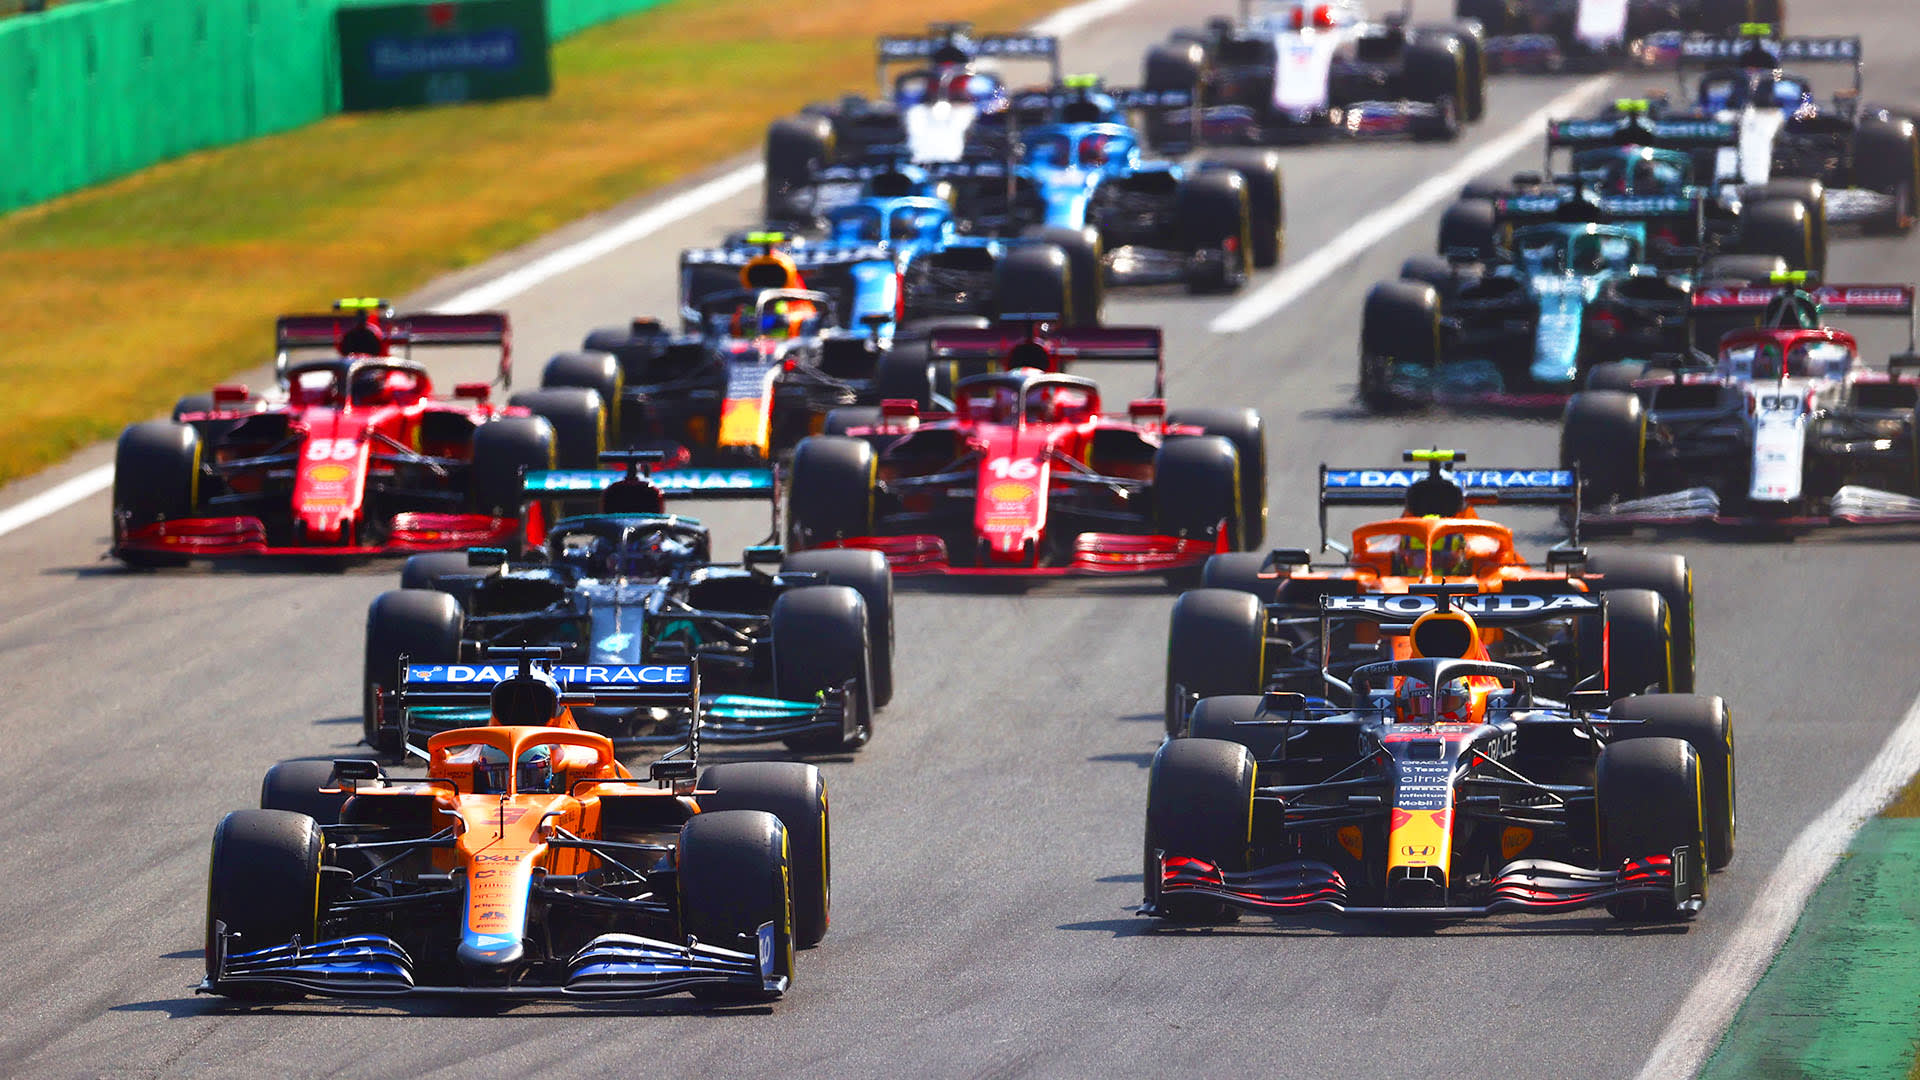 8 reasons 2021 will go down in F1 history as one of the classic seasons |  Formula 1®